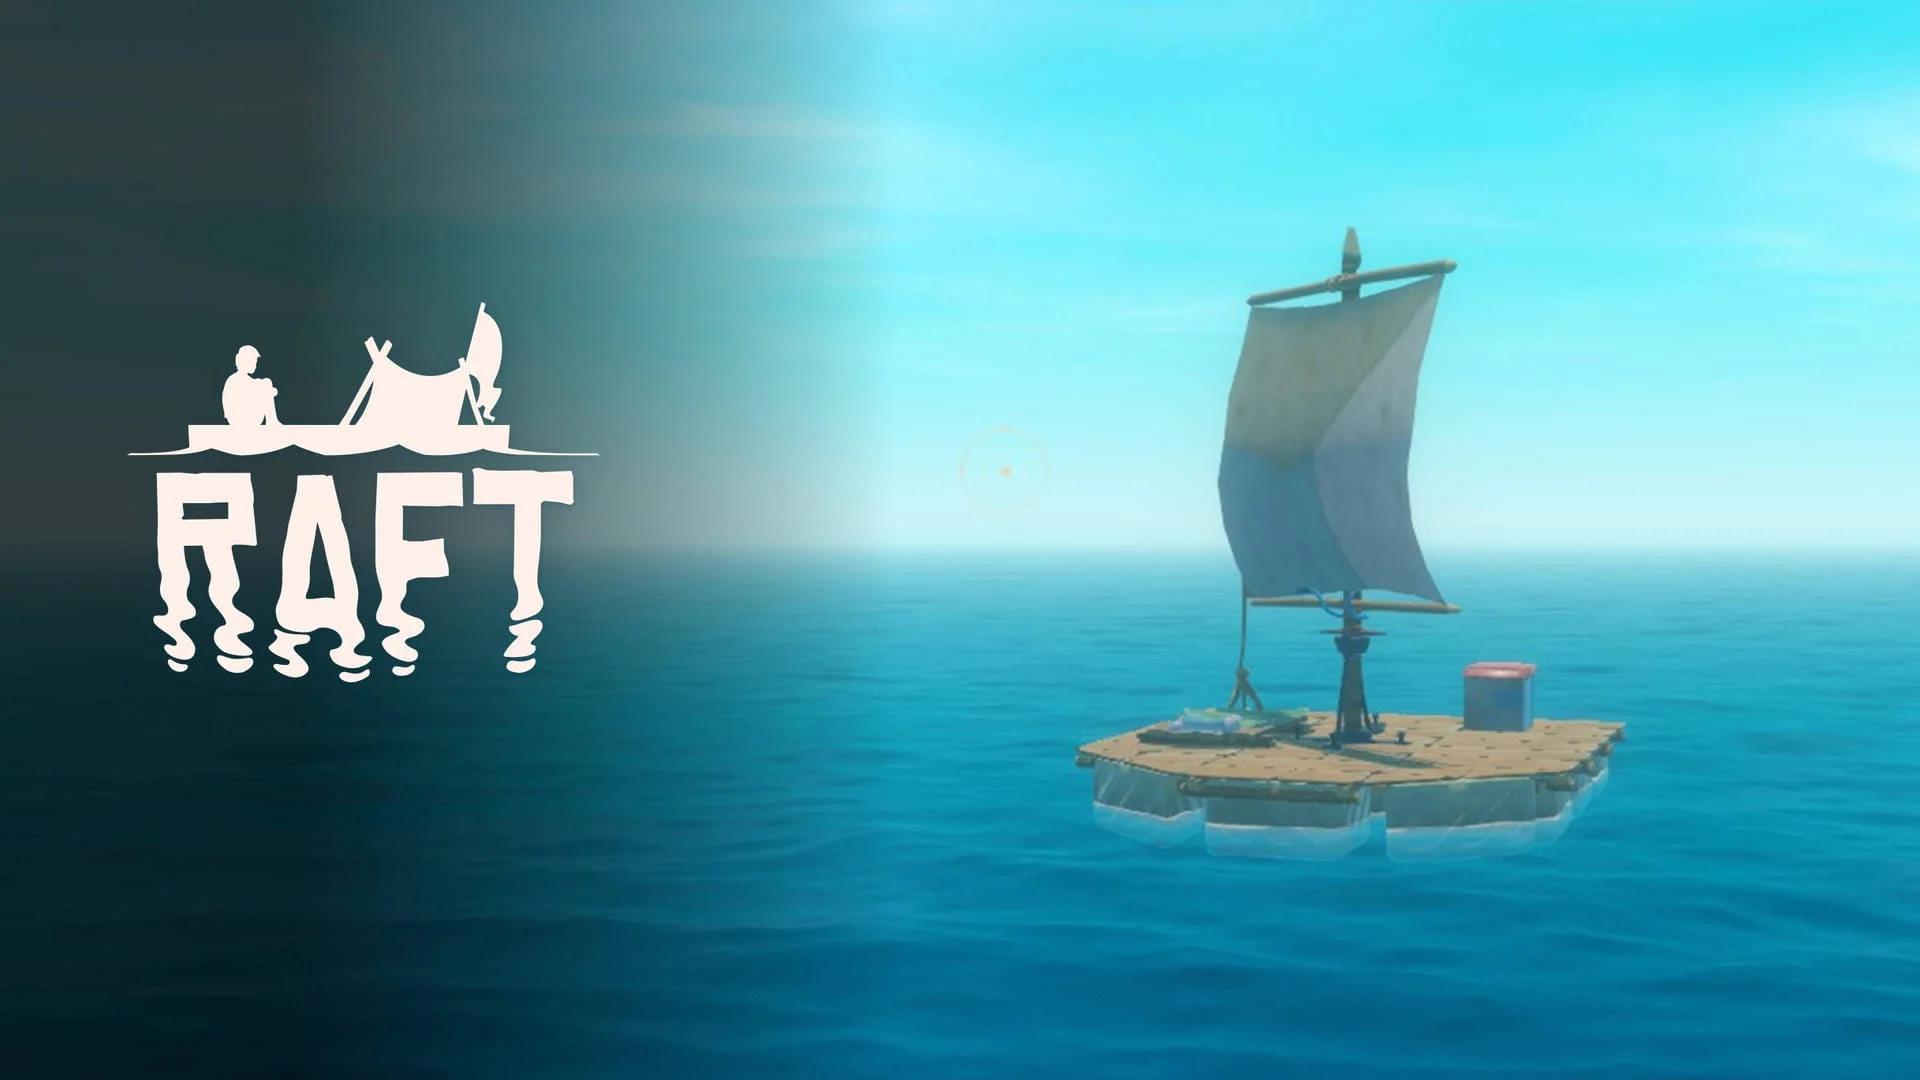 Read more about the article How Does The Sail Work In Raft